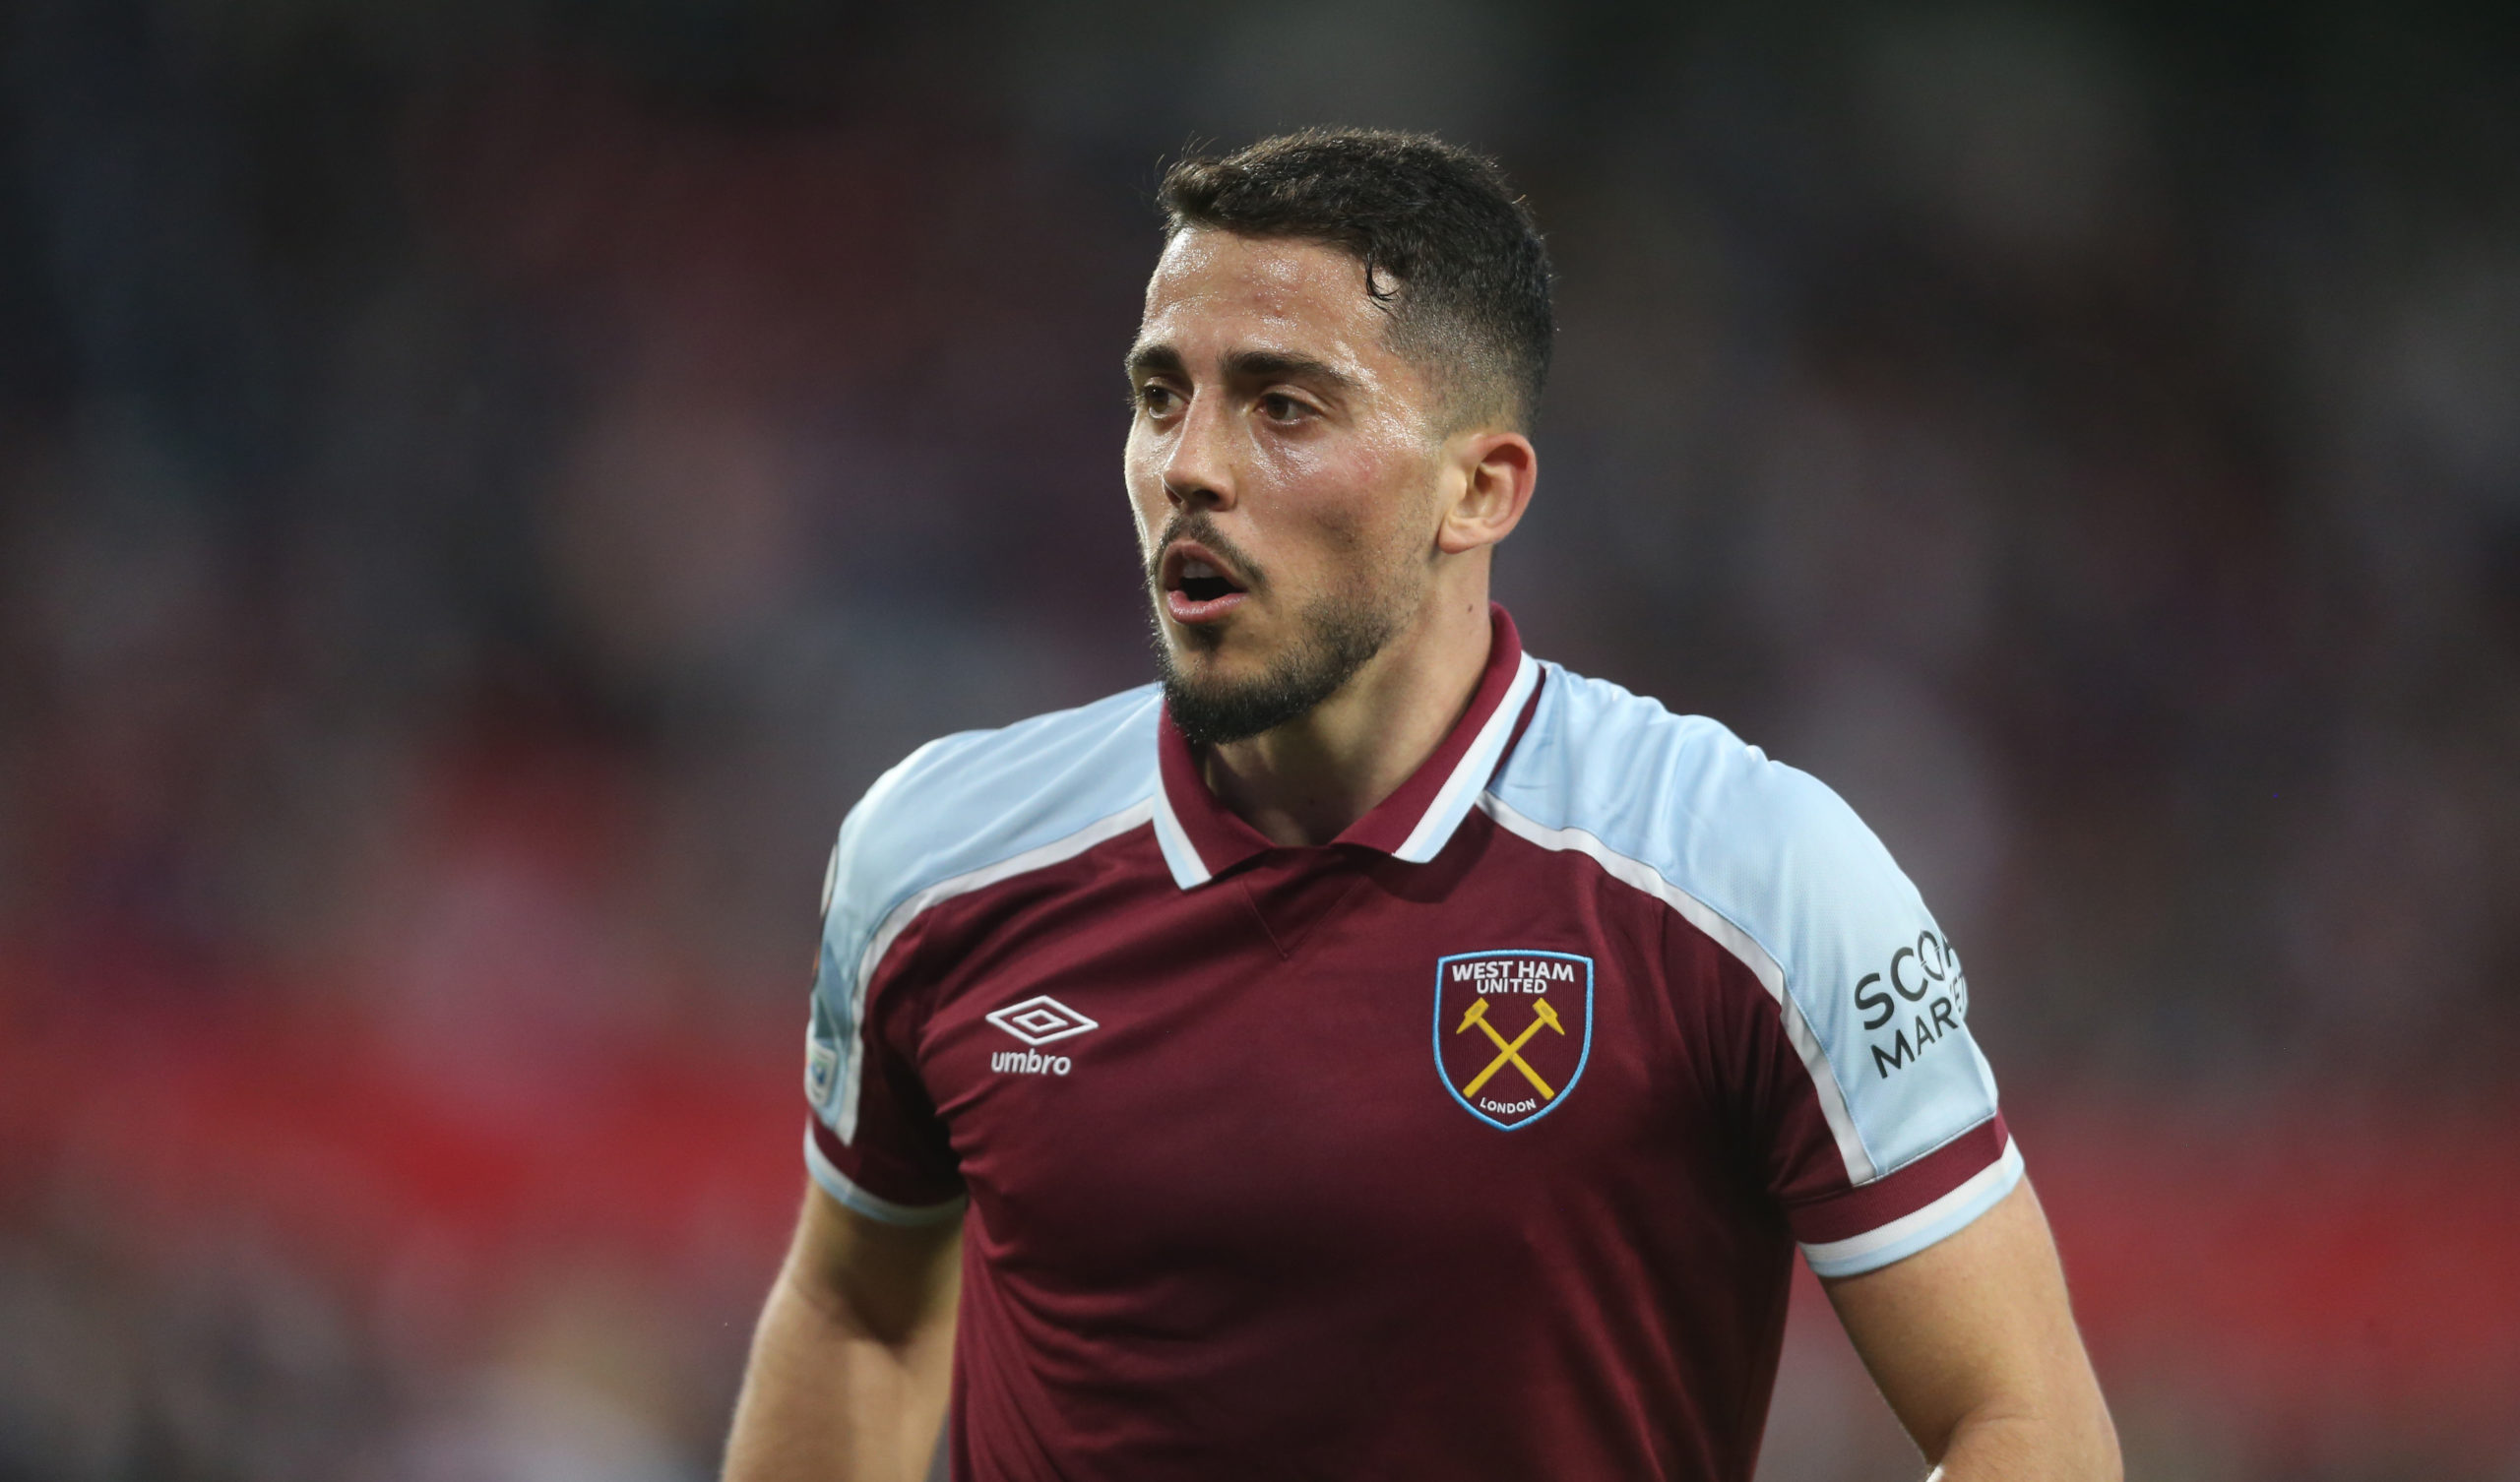 'I can't wait to see...': Pablo Fornals uses one word to describe West Ham fans after Sevilla clash